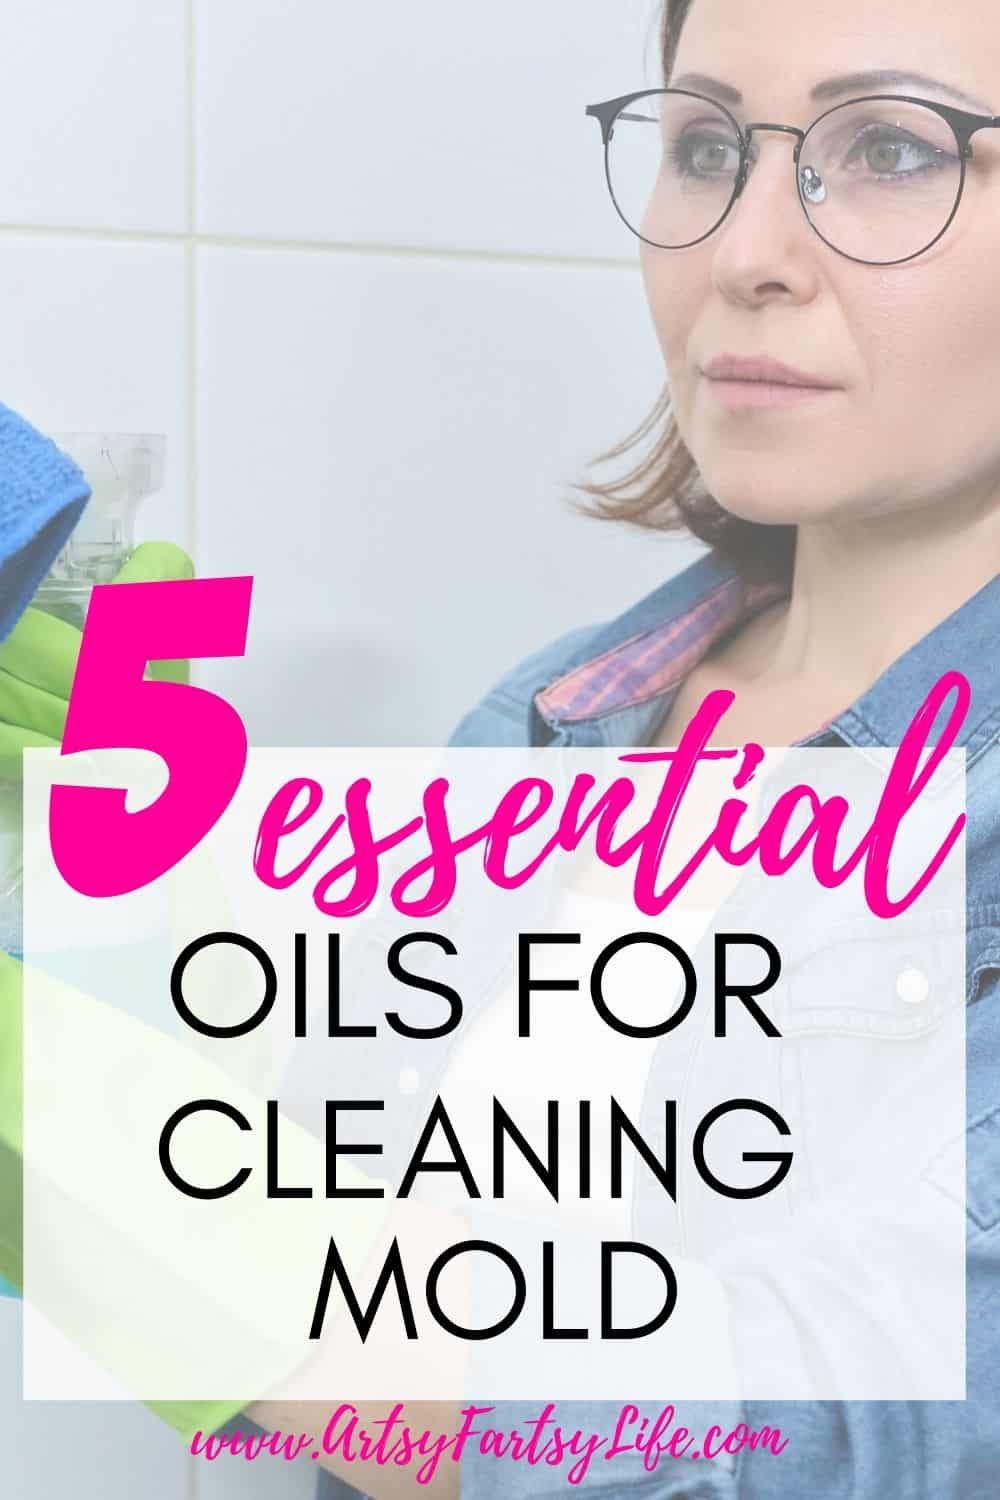 How To Get Rid of Mold with Essential Oils